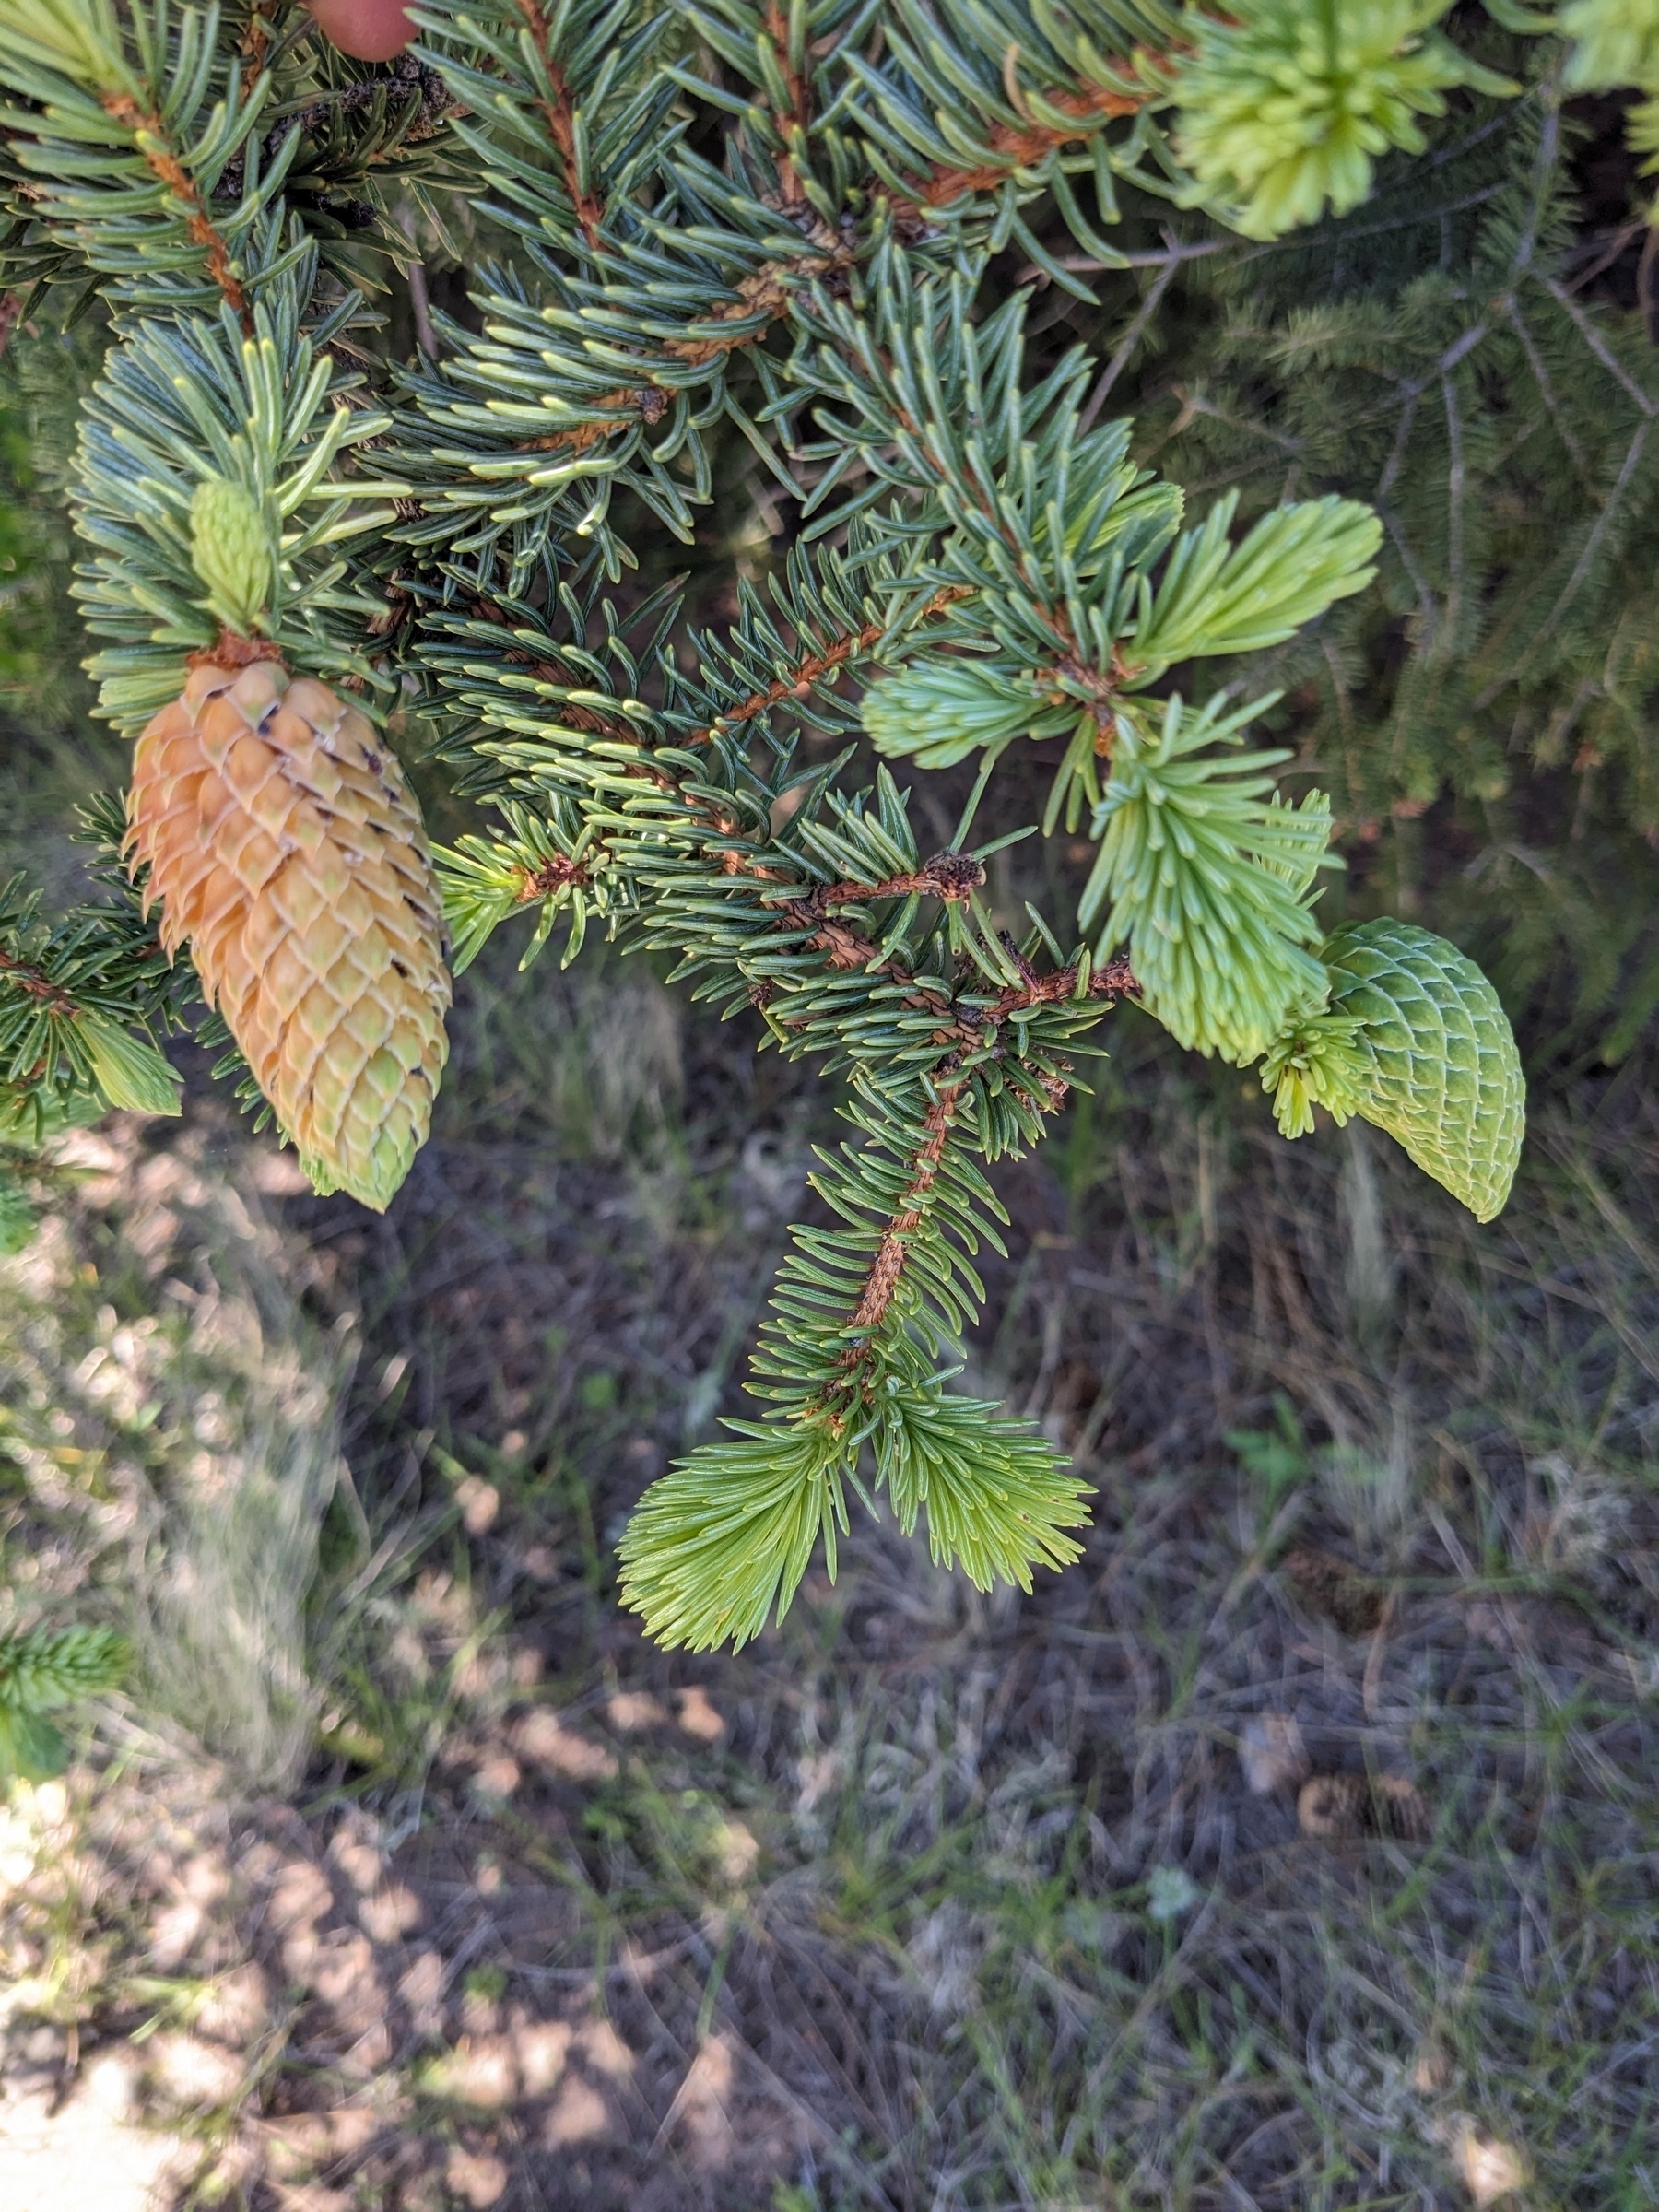 Newly formed pine cones on a fir tree